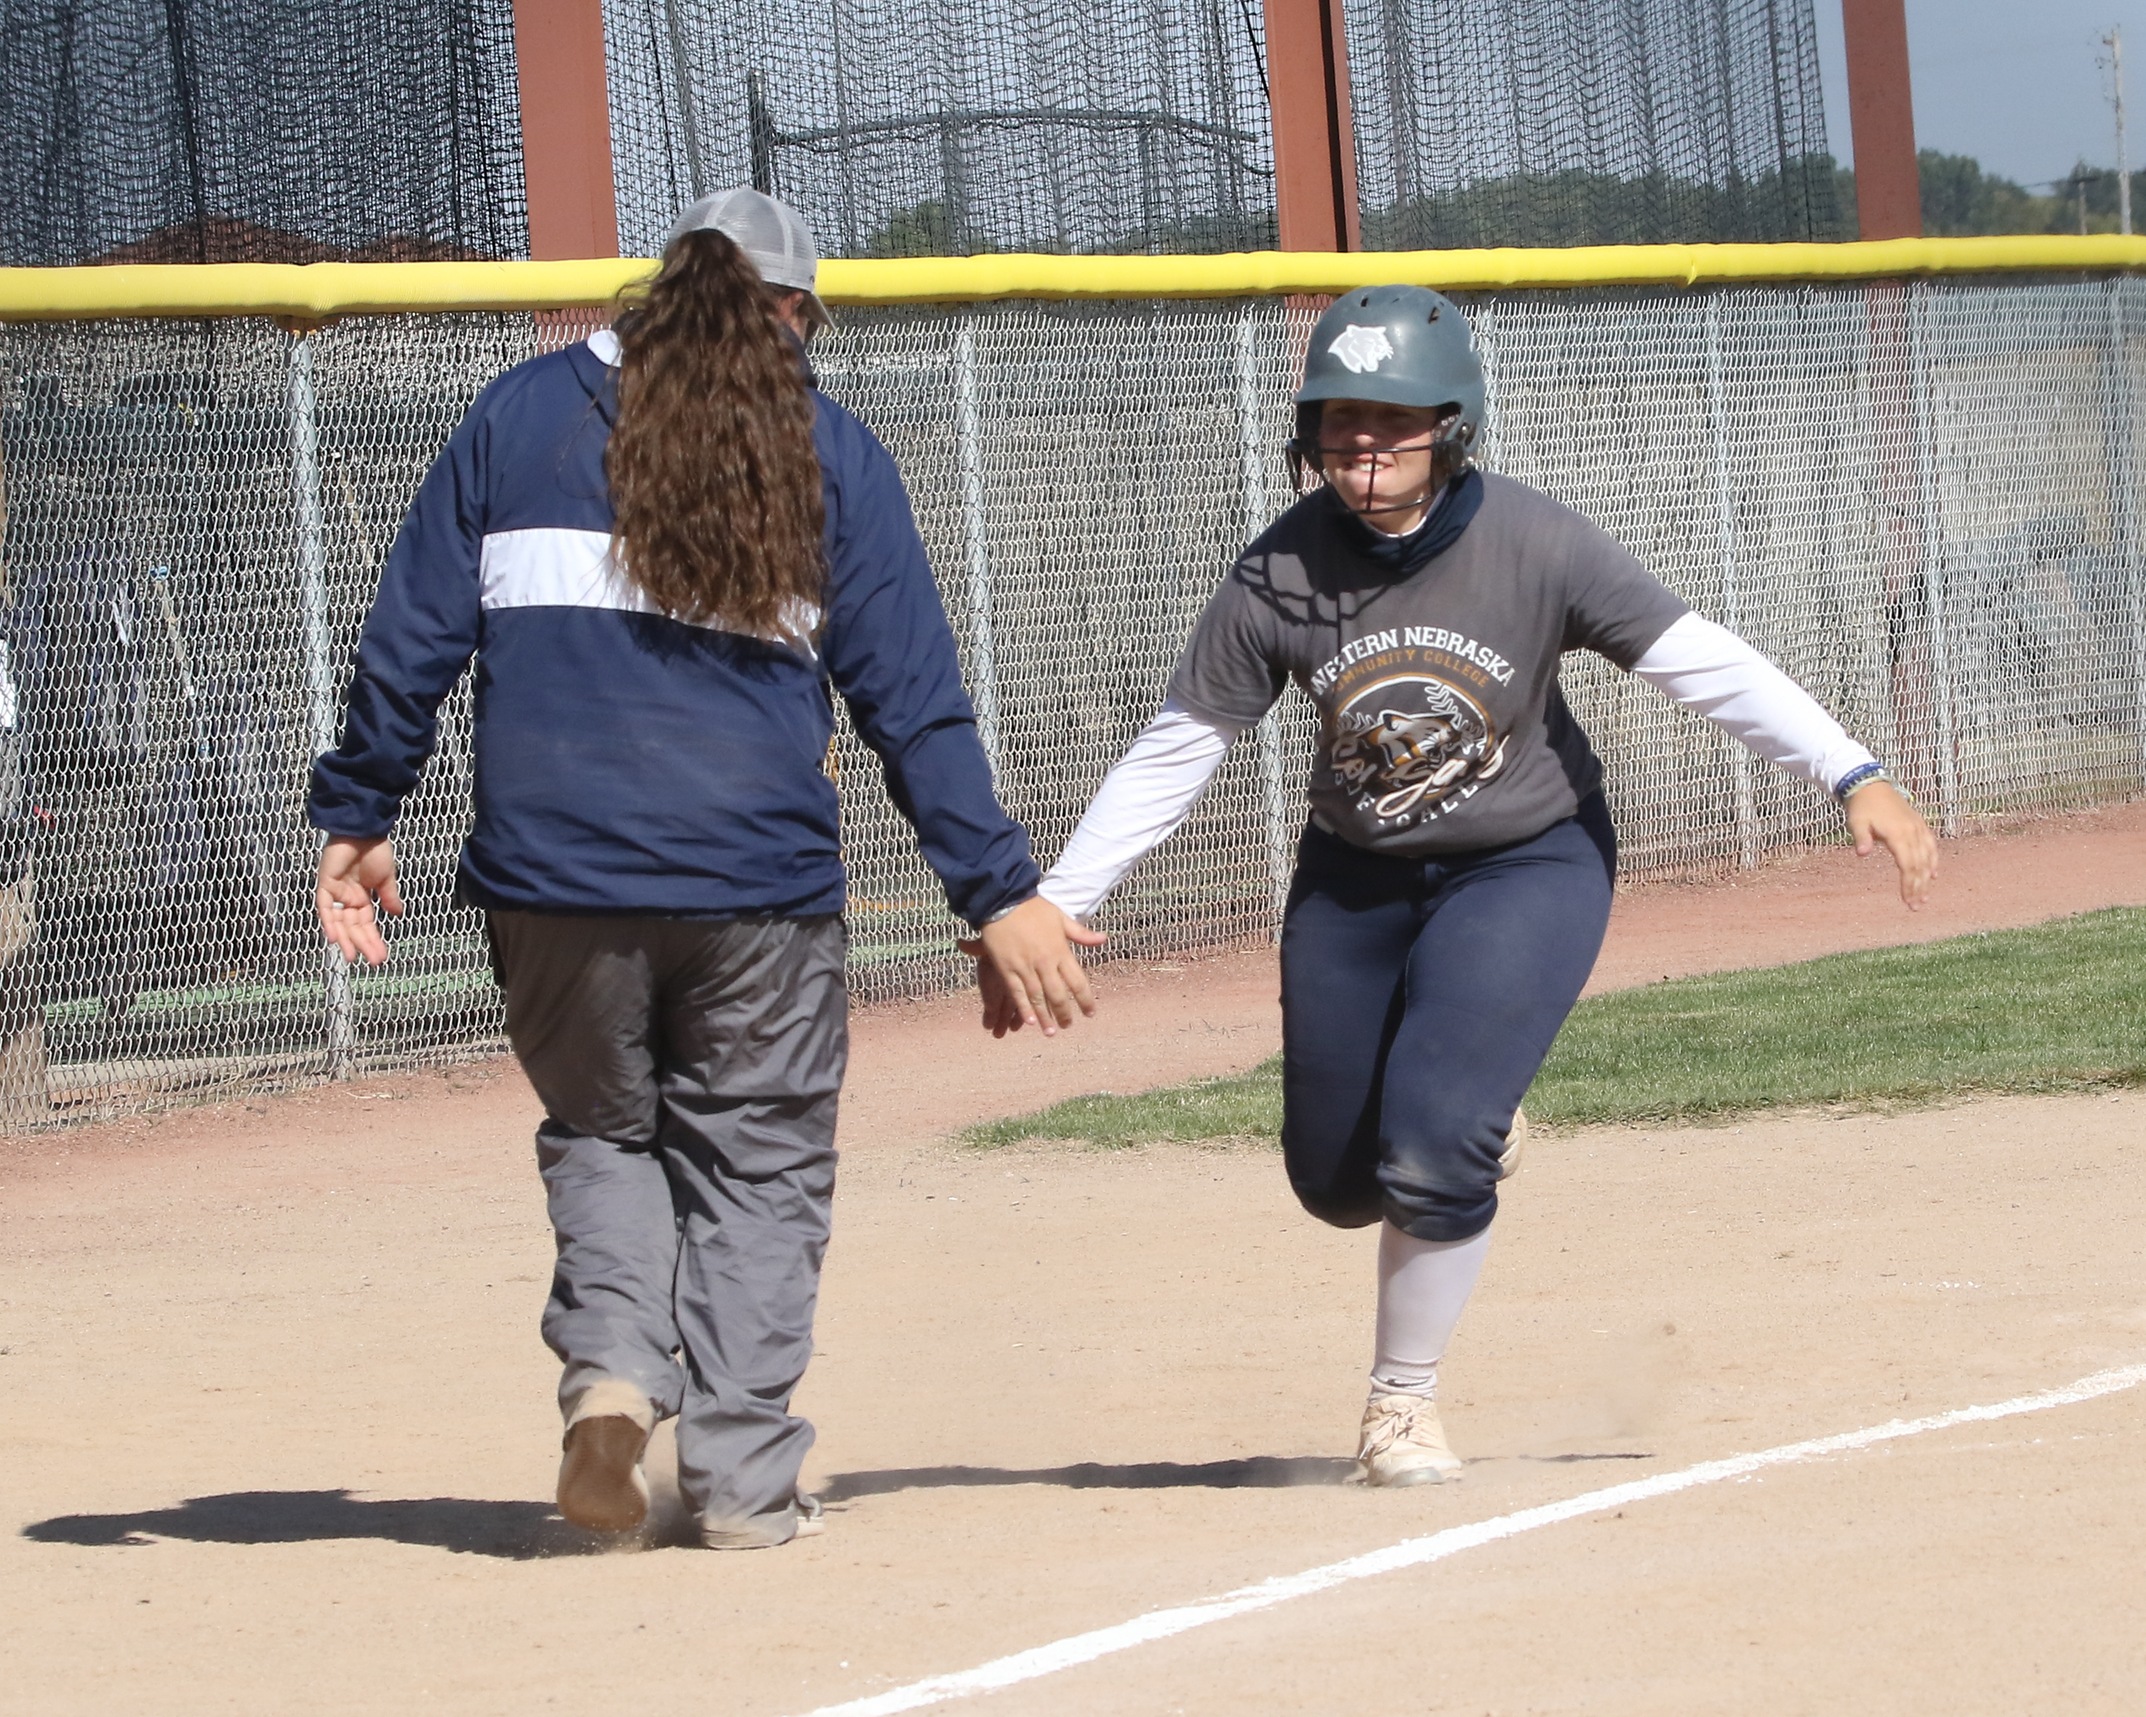 WNCC softball captures two wins, gives coach Groves her 100th win